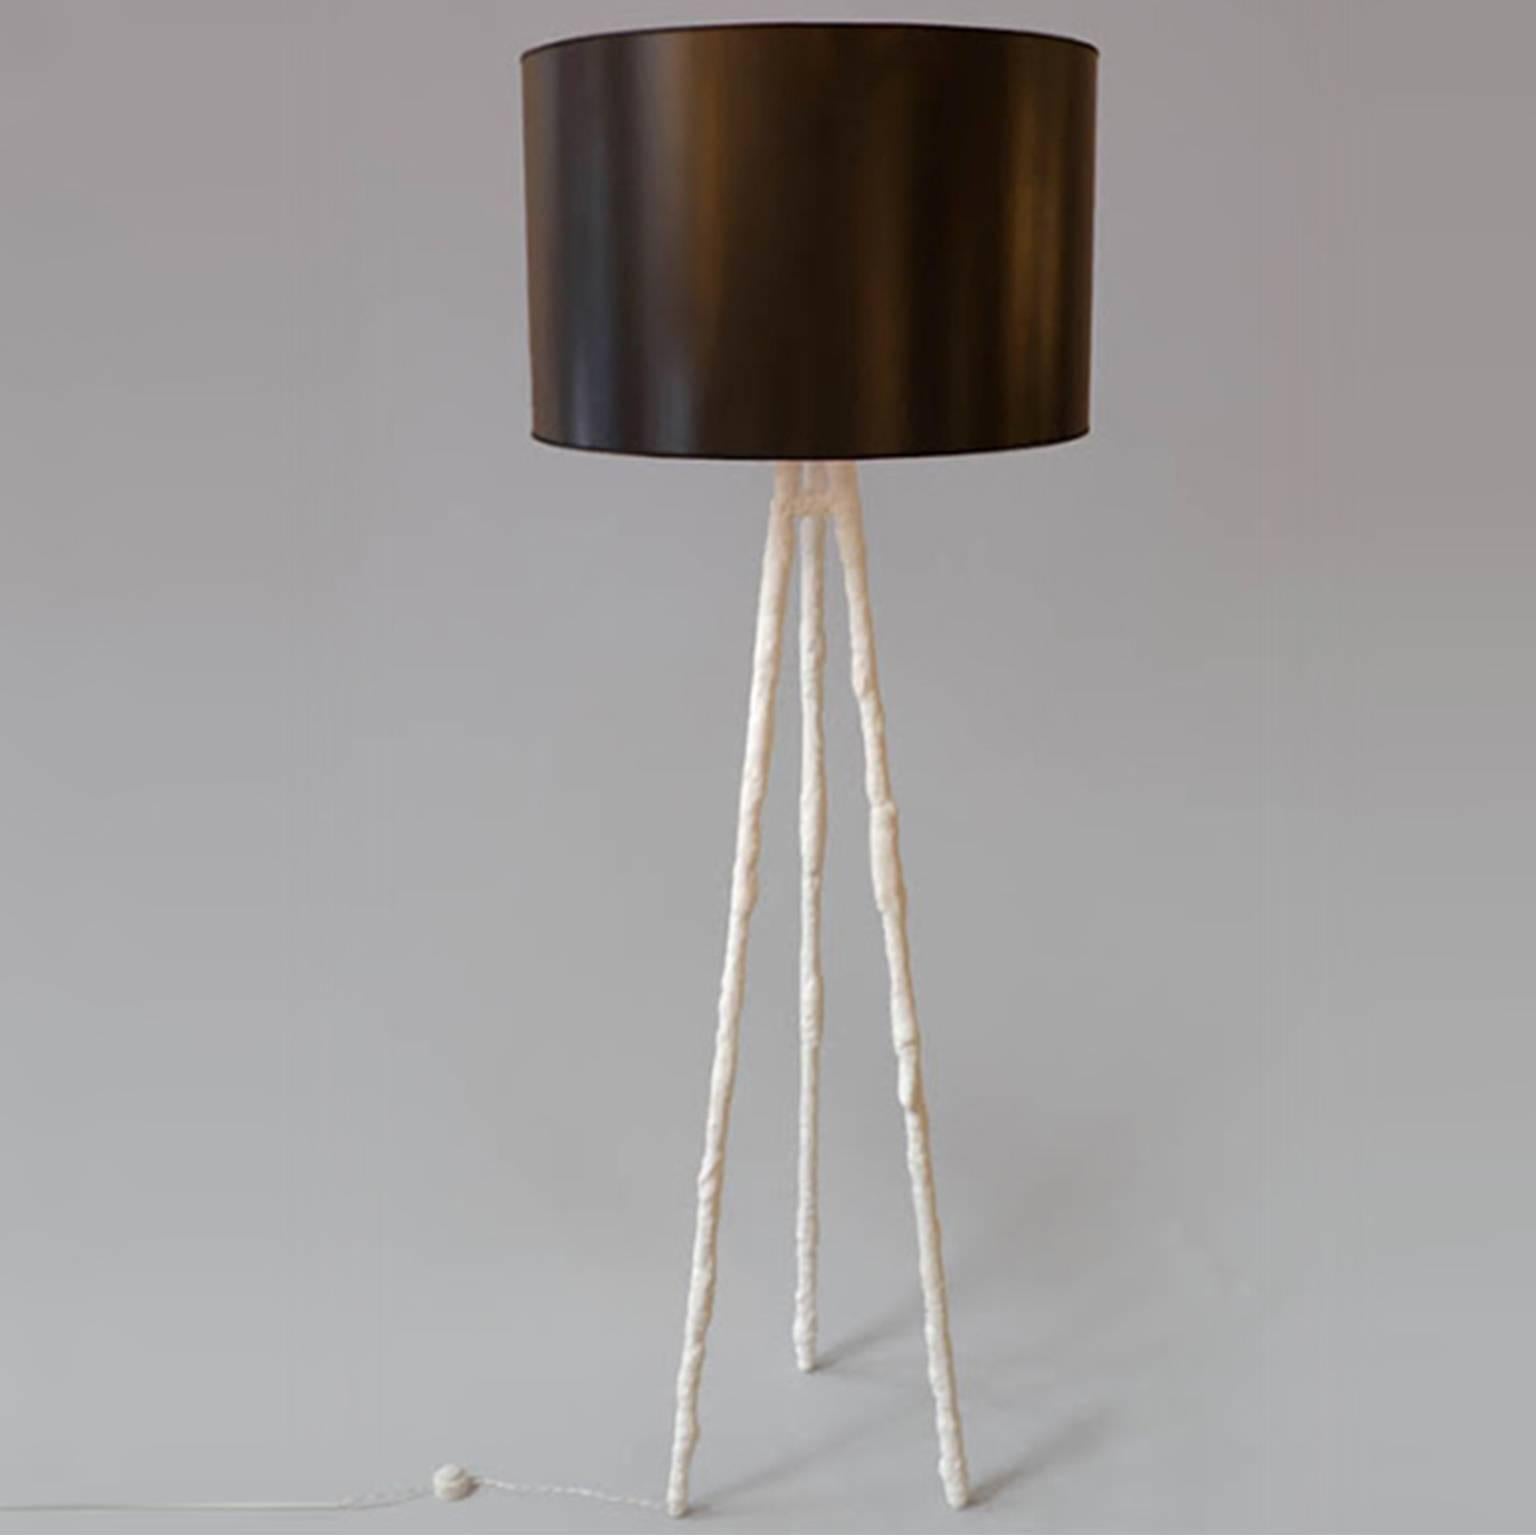 Triplico floor lamp.

Shade included by trans-LUXE.

Shade size: 26"D x 16" H.

Handmade plaster solid firm coated finish.

Measures: 58” H.

Made in New York City by trans-LUXE.

Additional custom sizes, colors and finishes